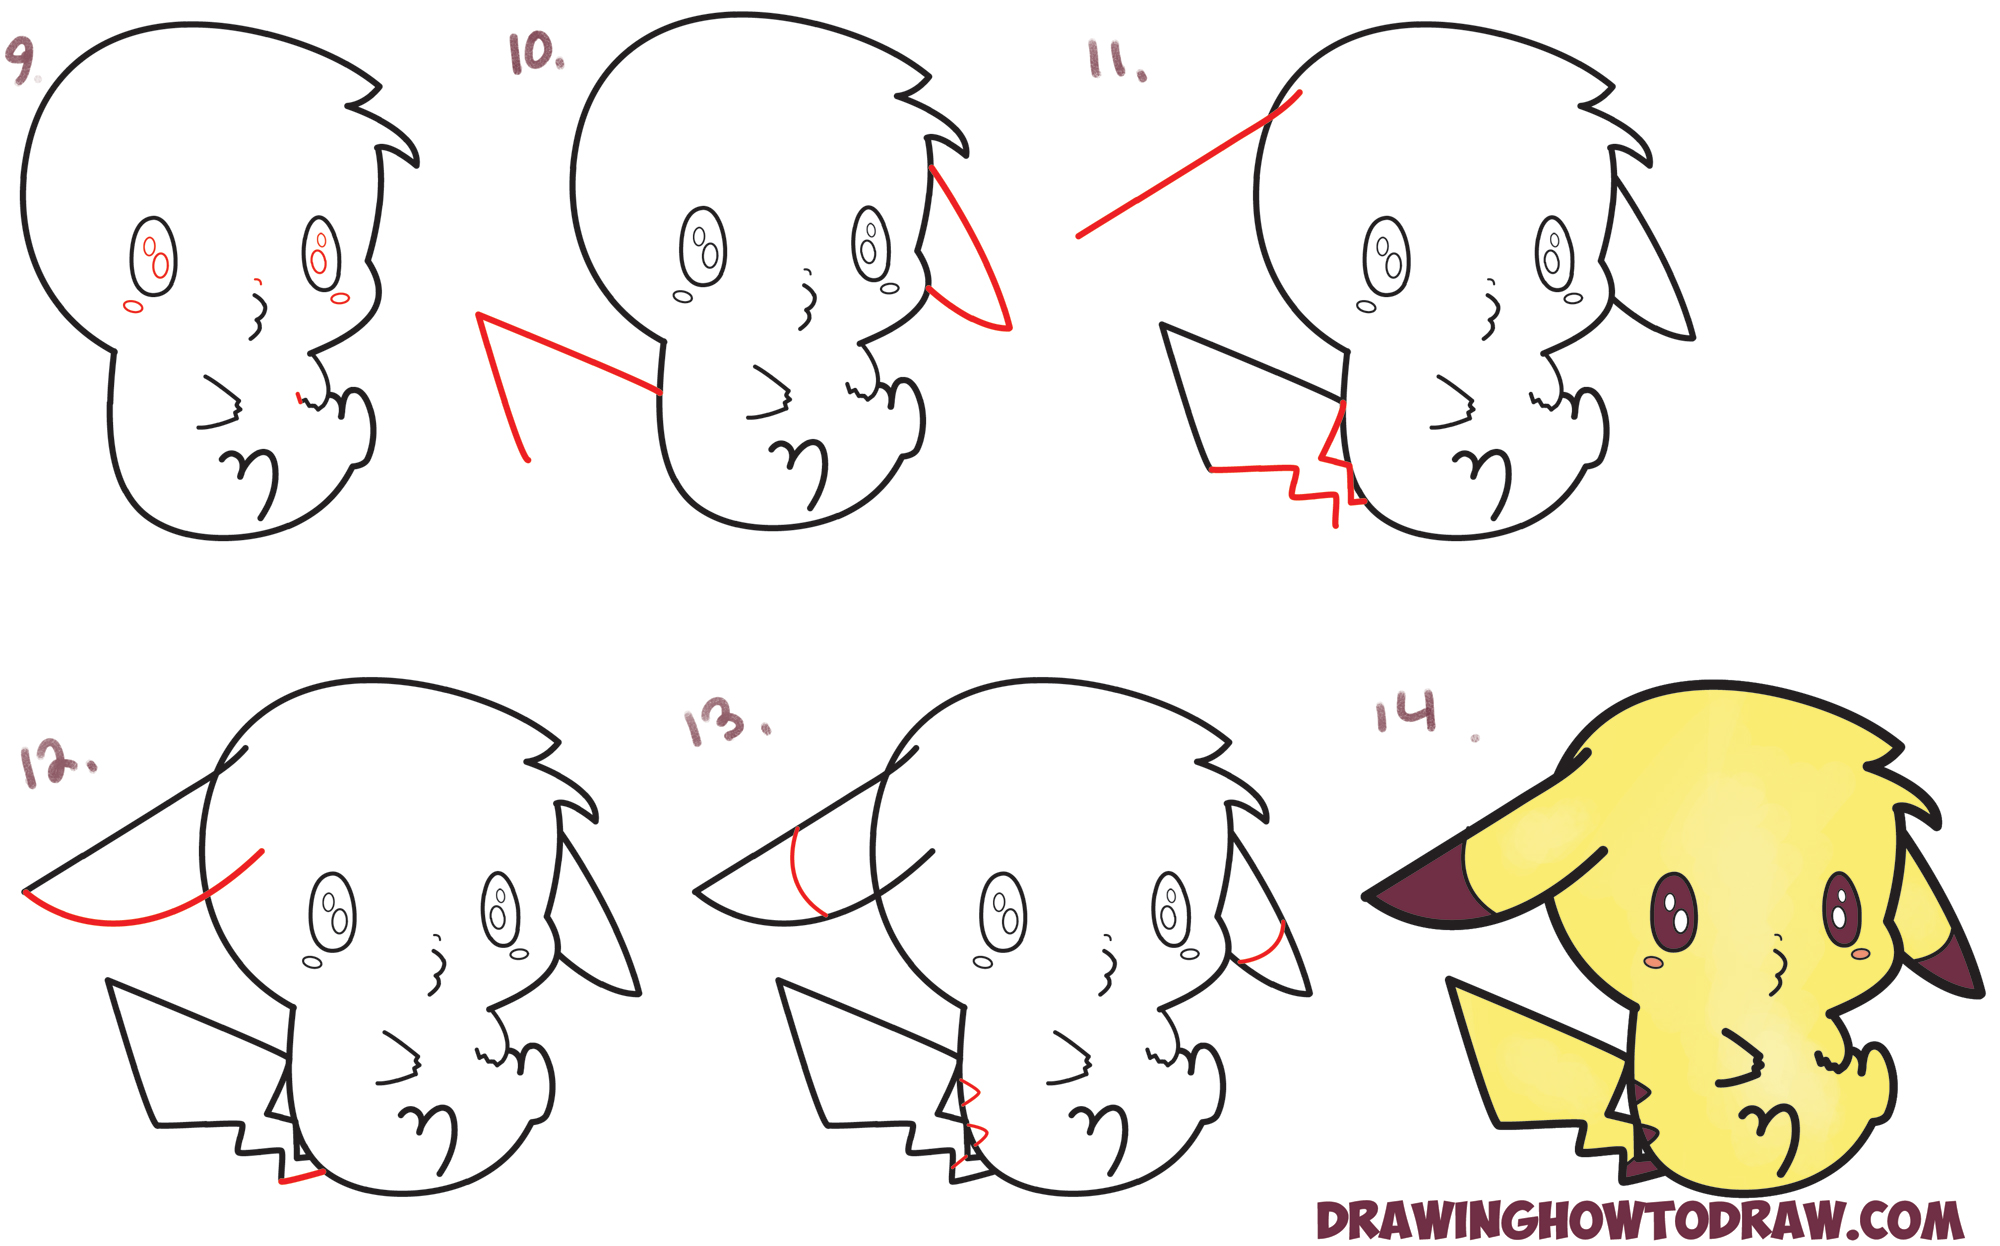 Learn How to Draw an Adorable Pikachu (Kawaii / Chibi) Simple Steps Drawing Lesson for Children